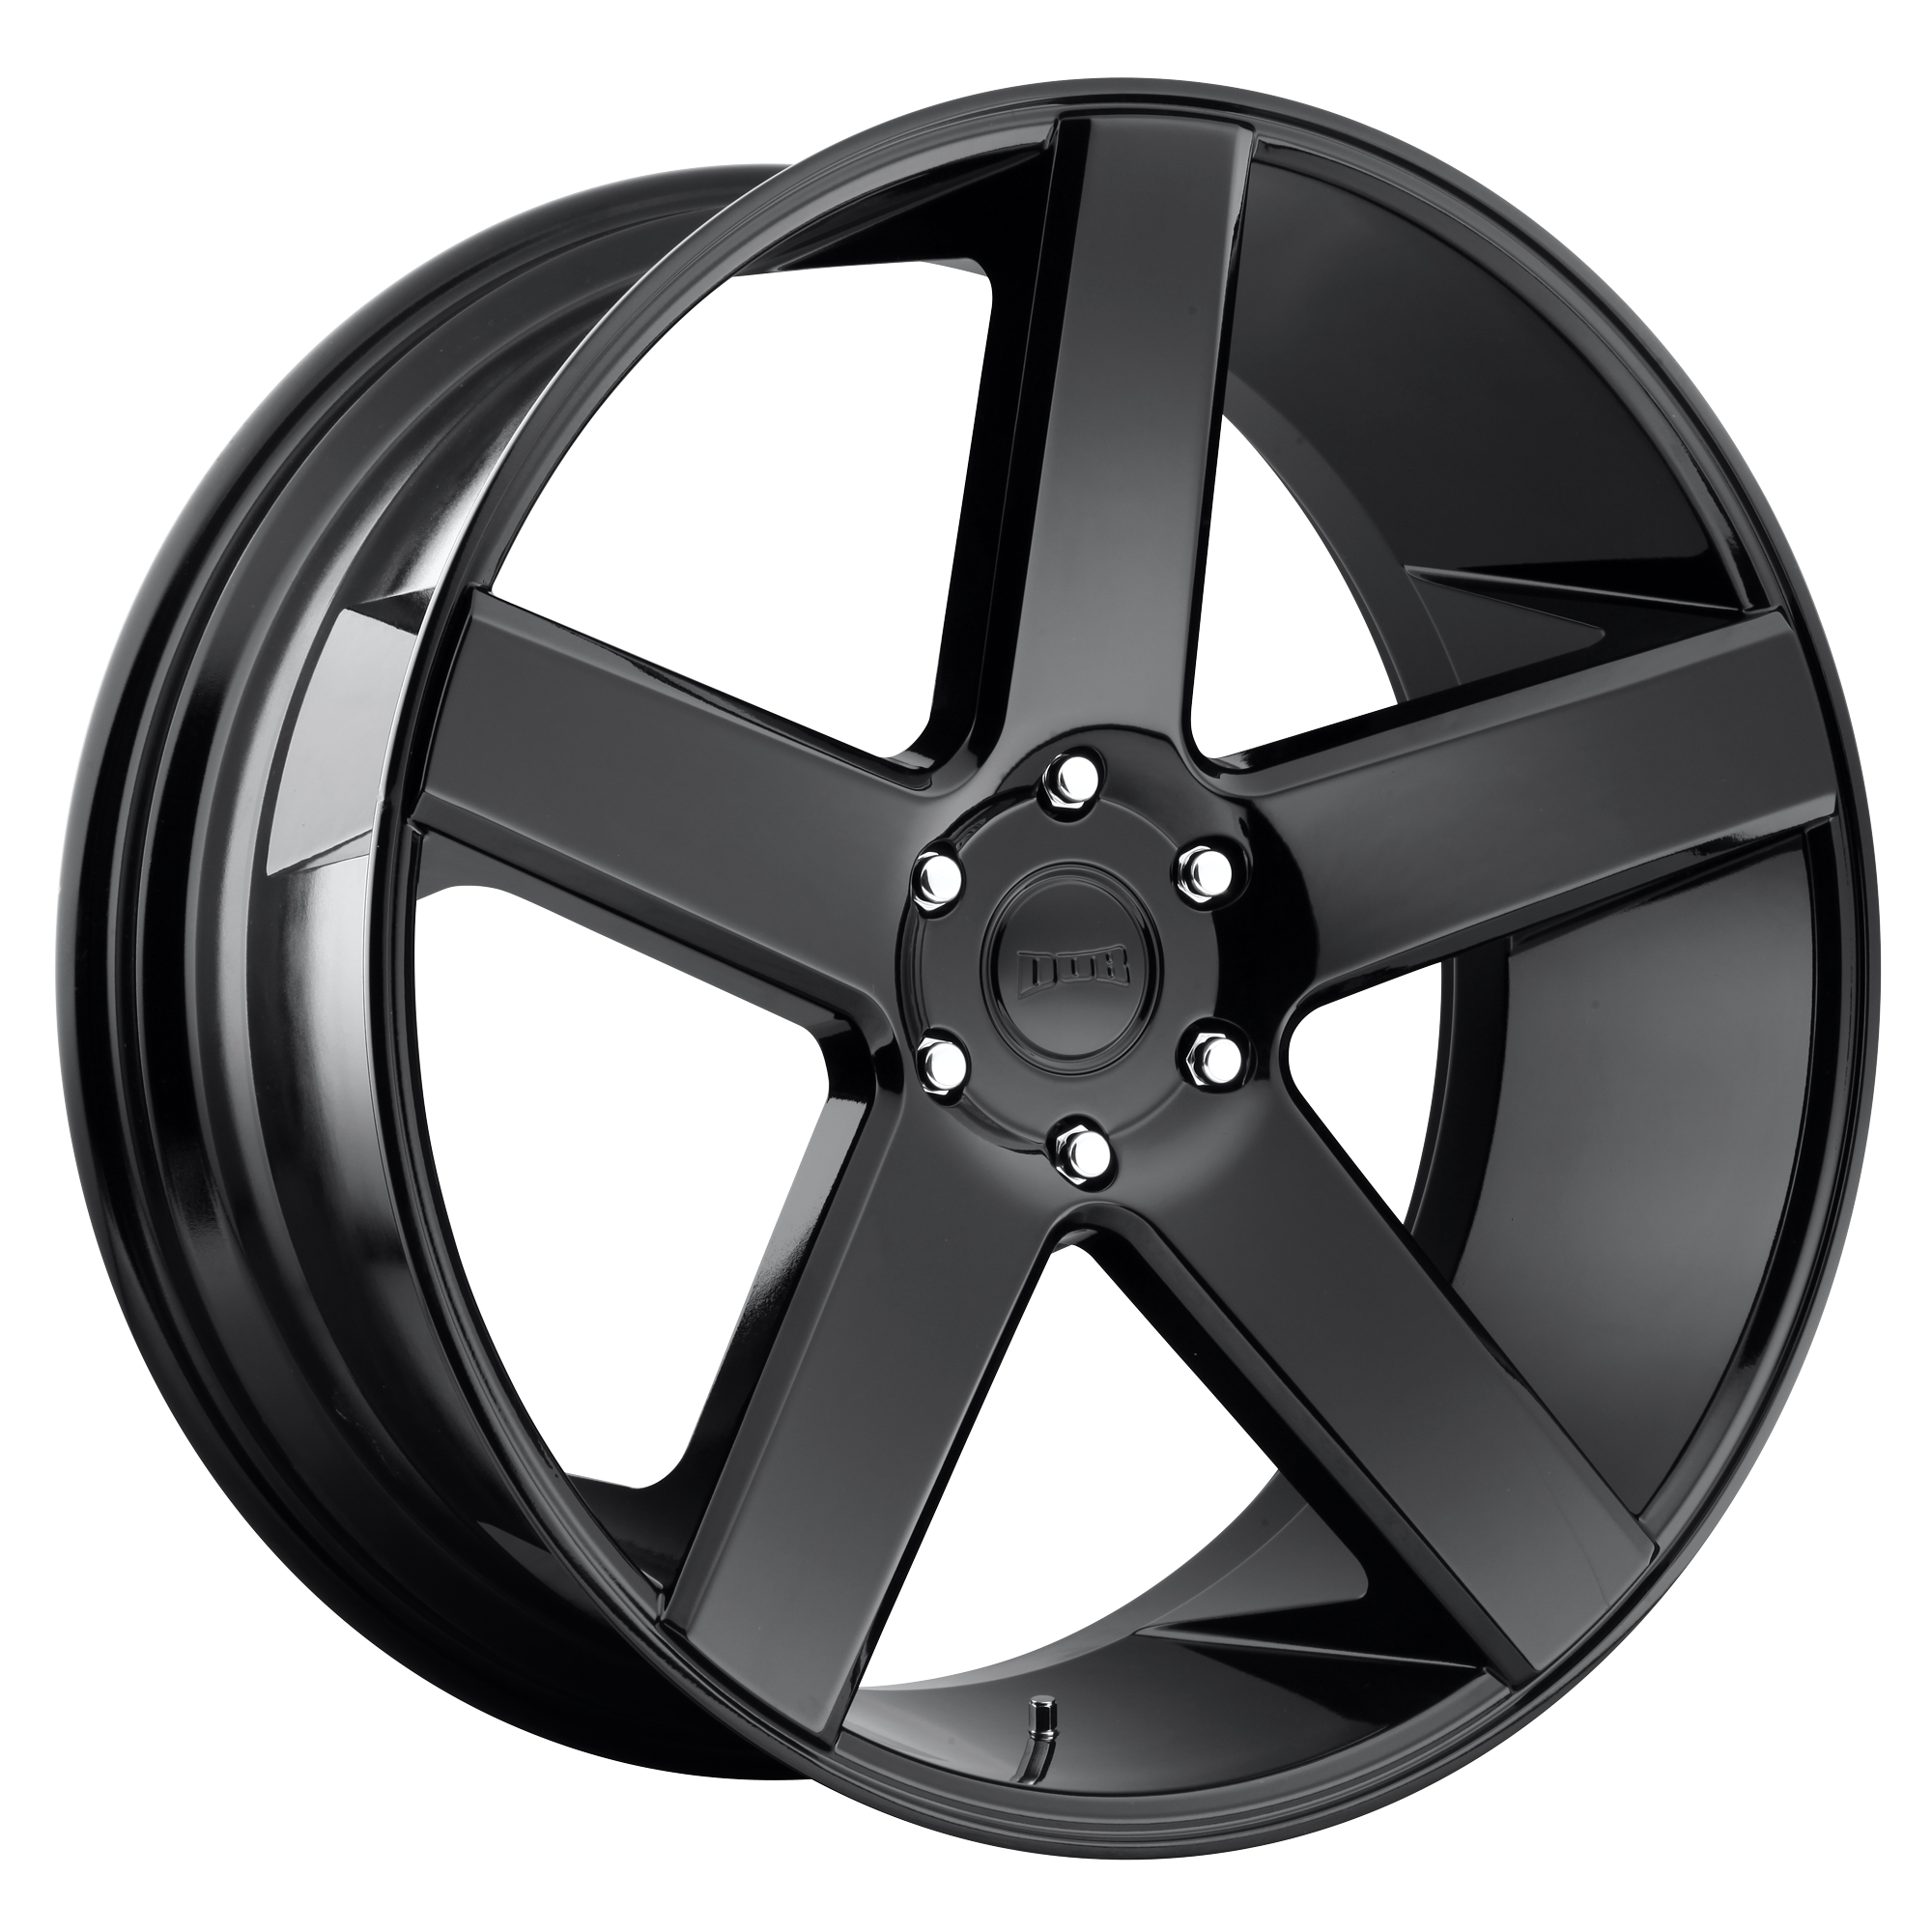 BALLER 22x10.5 5x115.00 GLOSS BLACK (20 mm) - Tires and Engine Performance